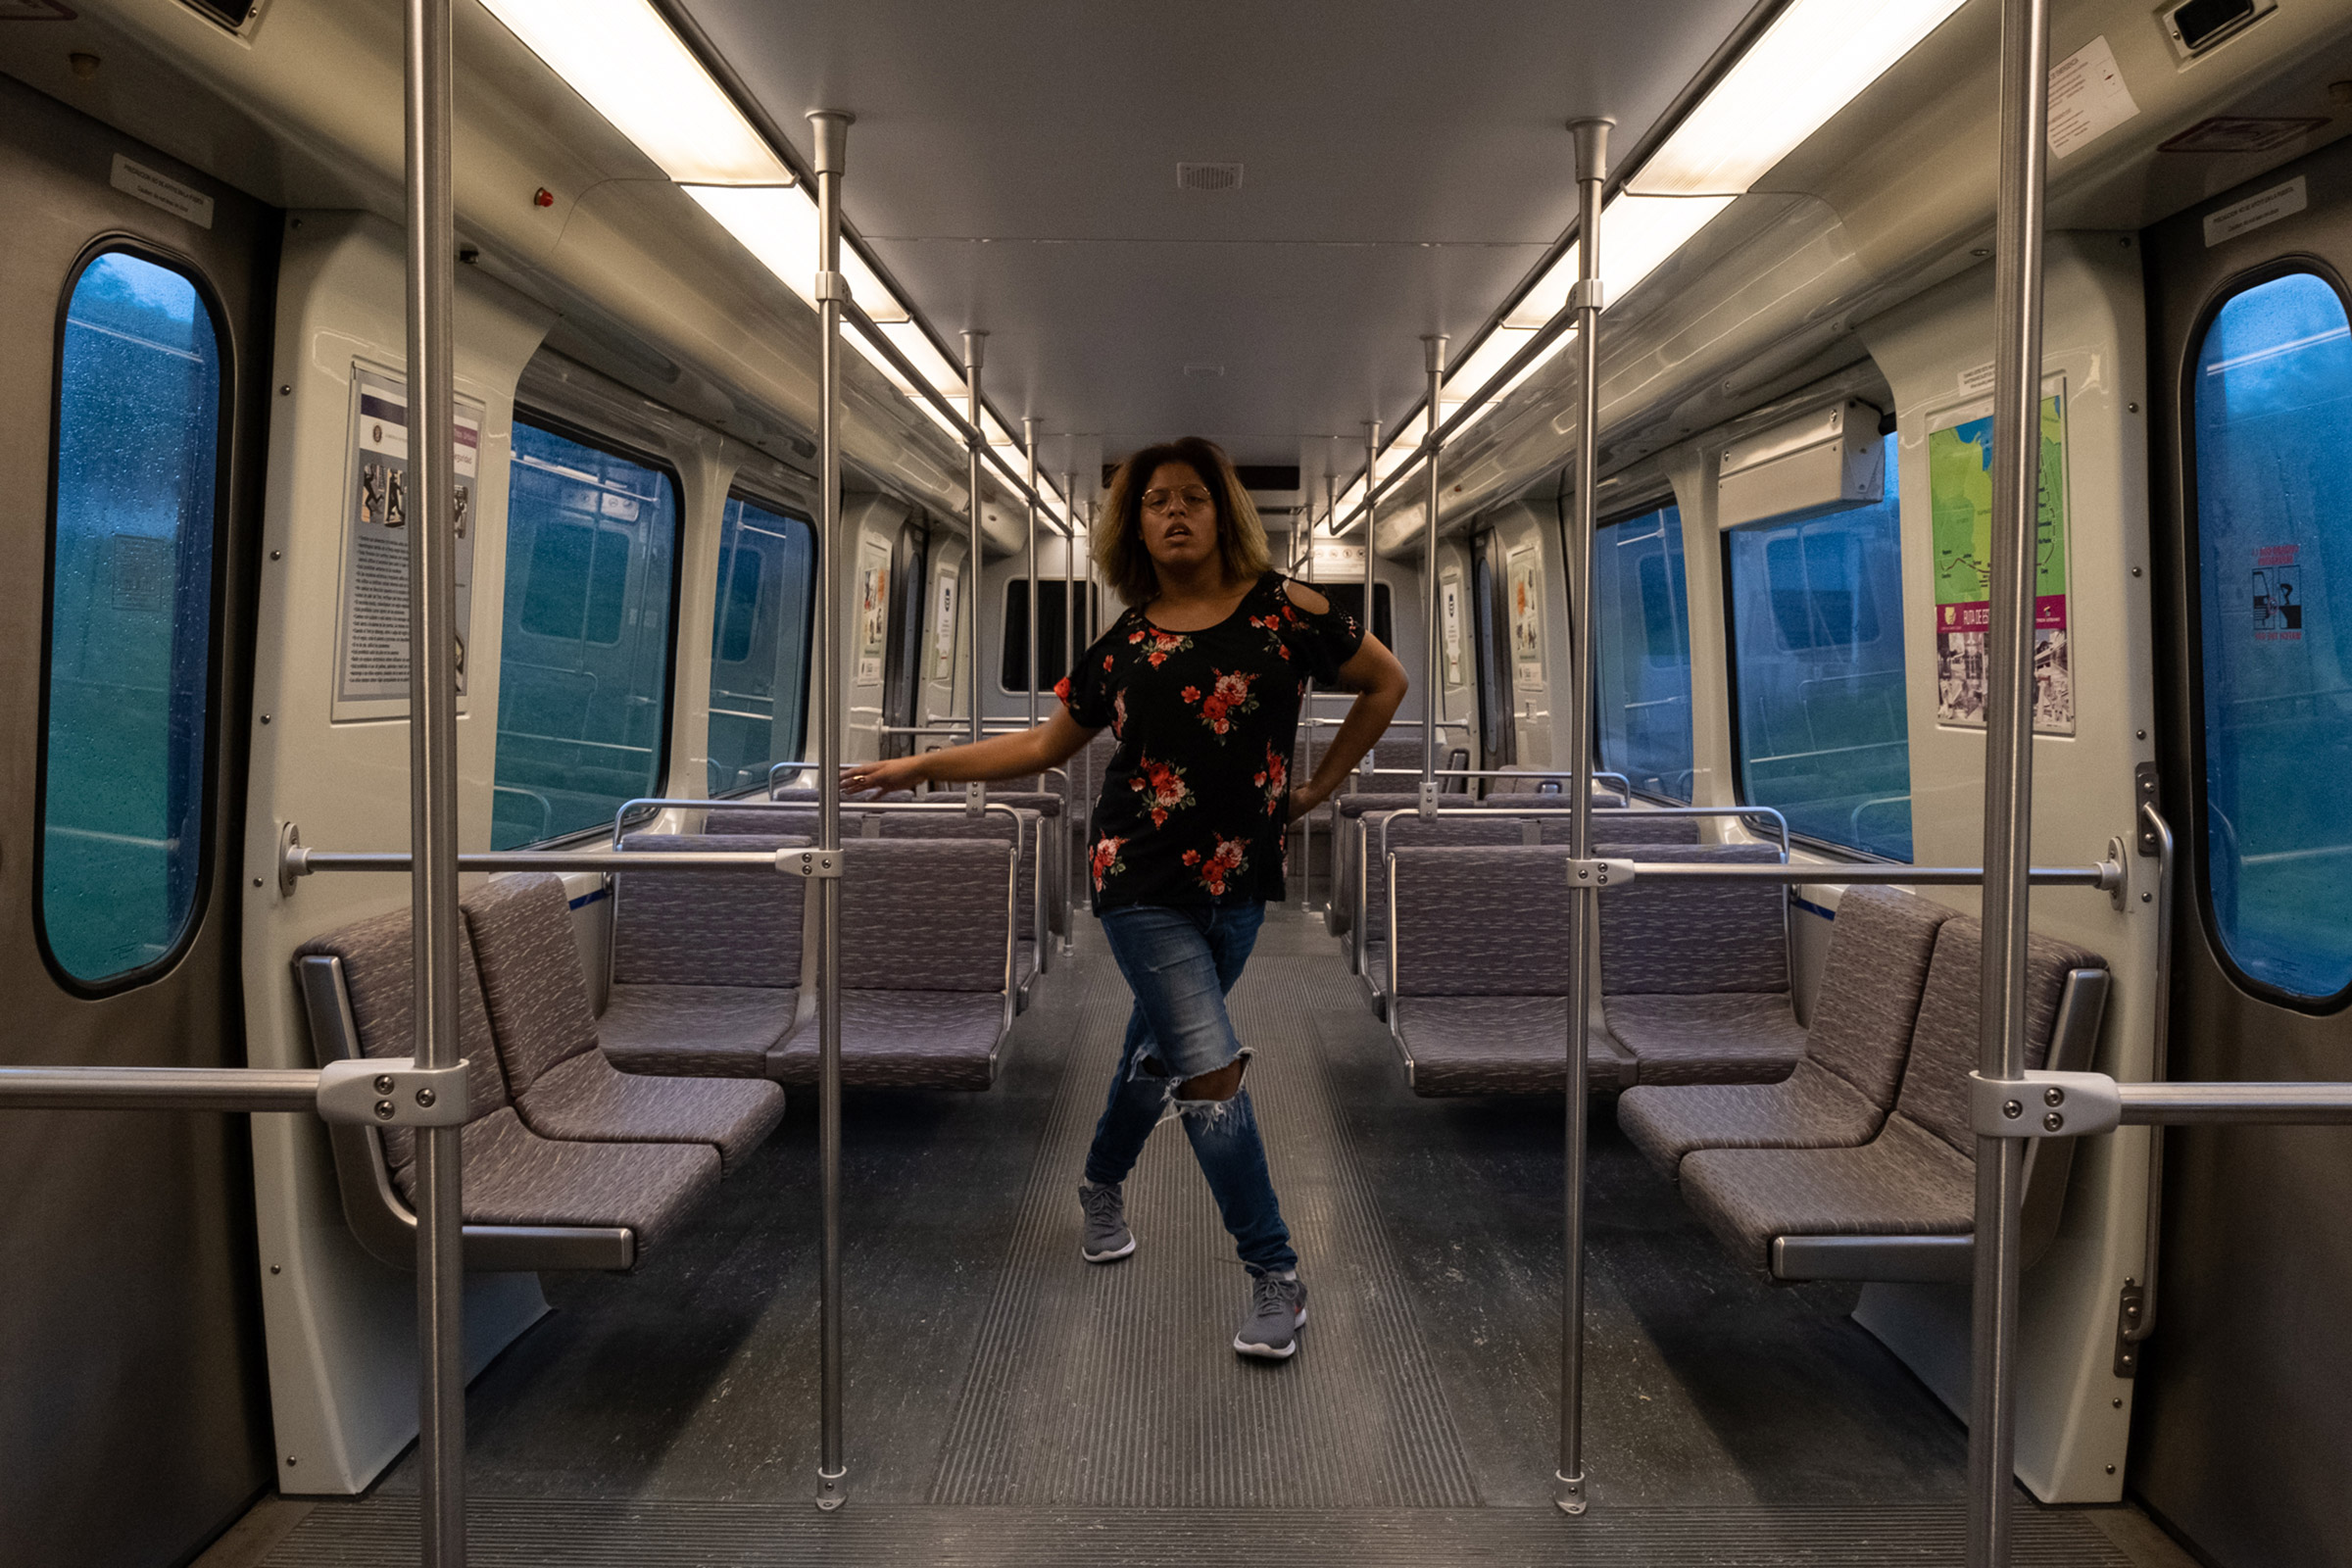 LeQueen, 21, vogues on the train she takes on a daily basis to commute to work and other places around San Juan, Puerto Rico. (Gabriella N. Báez—Magnum Foundation)